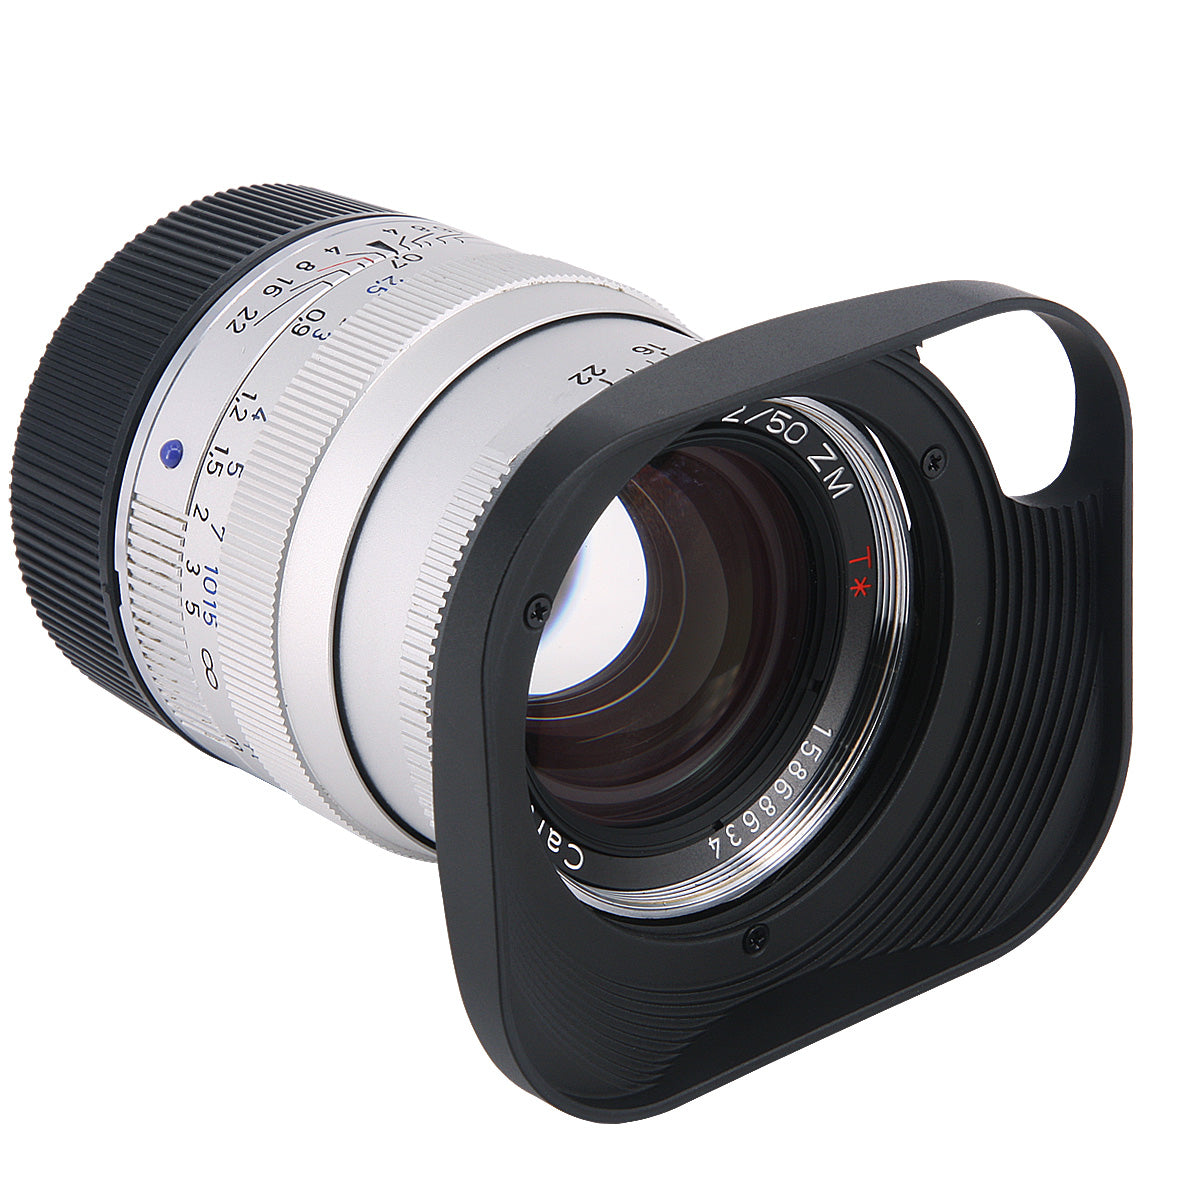 Haoge LH-ZV02P Lens Hood for Carl Zeiss Biogon T 2/35 35mm f2 ZM, C Biogon T 2.8/35 35mm f2.8 ZM, Planar T 2/50 50mm f2 ZM; Voigtlander NOKTON Classic 35mm f1.4 VM, 40mm f1.4 VM Hollow Out Designed